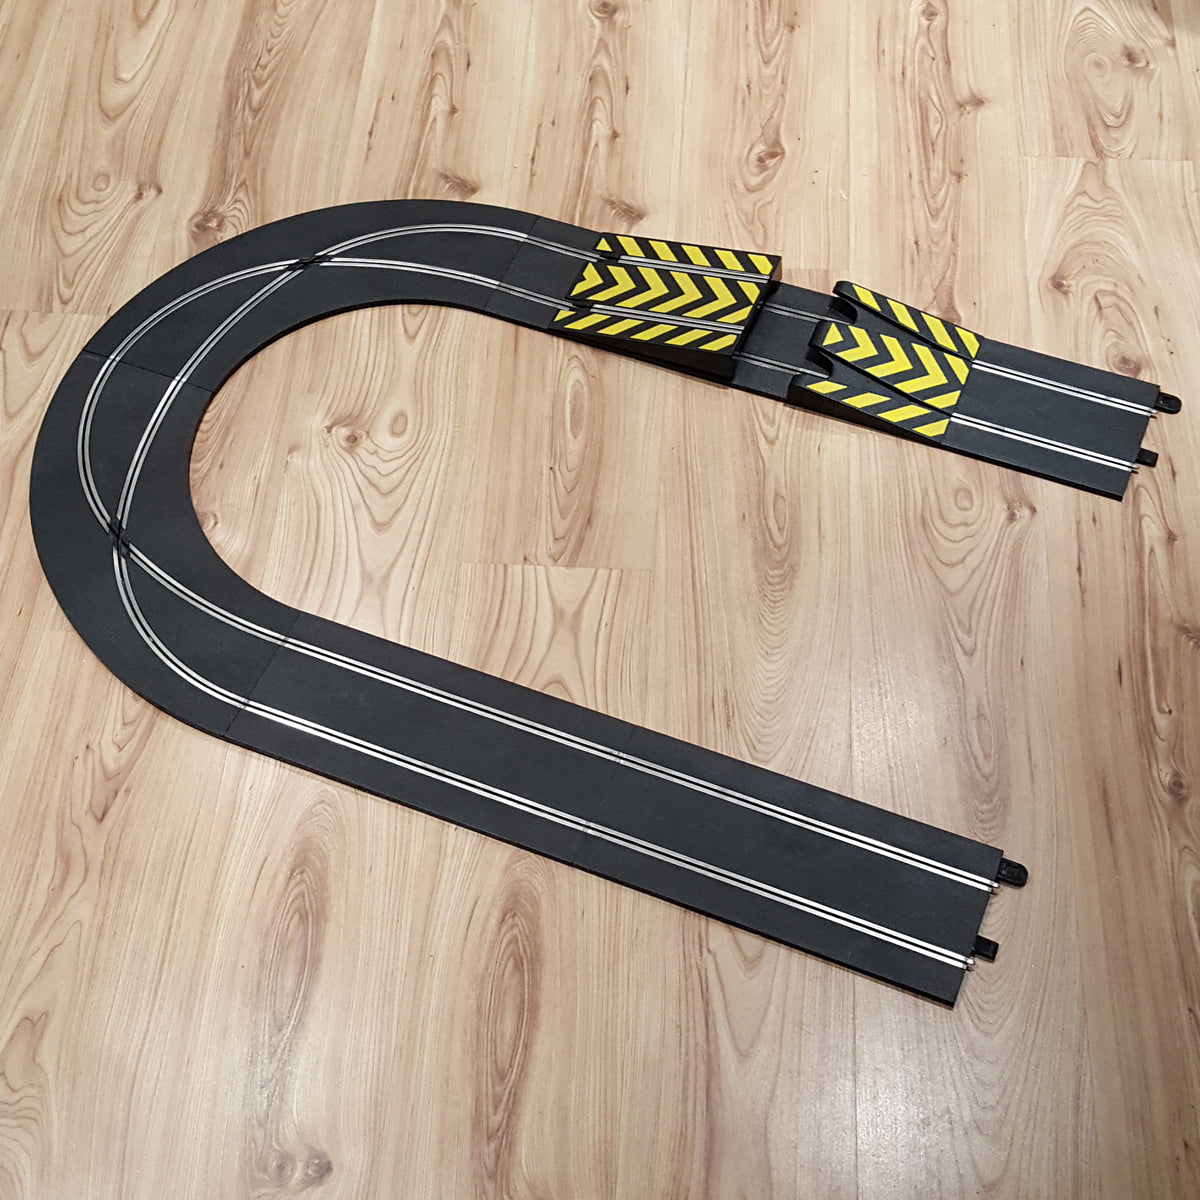 Scalextric Sport Track Extension Crossover Curves Ramp Jump C8211 C8203 C8205 #A